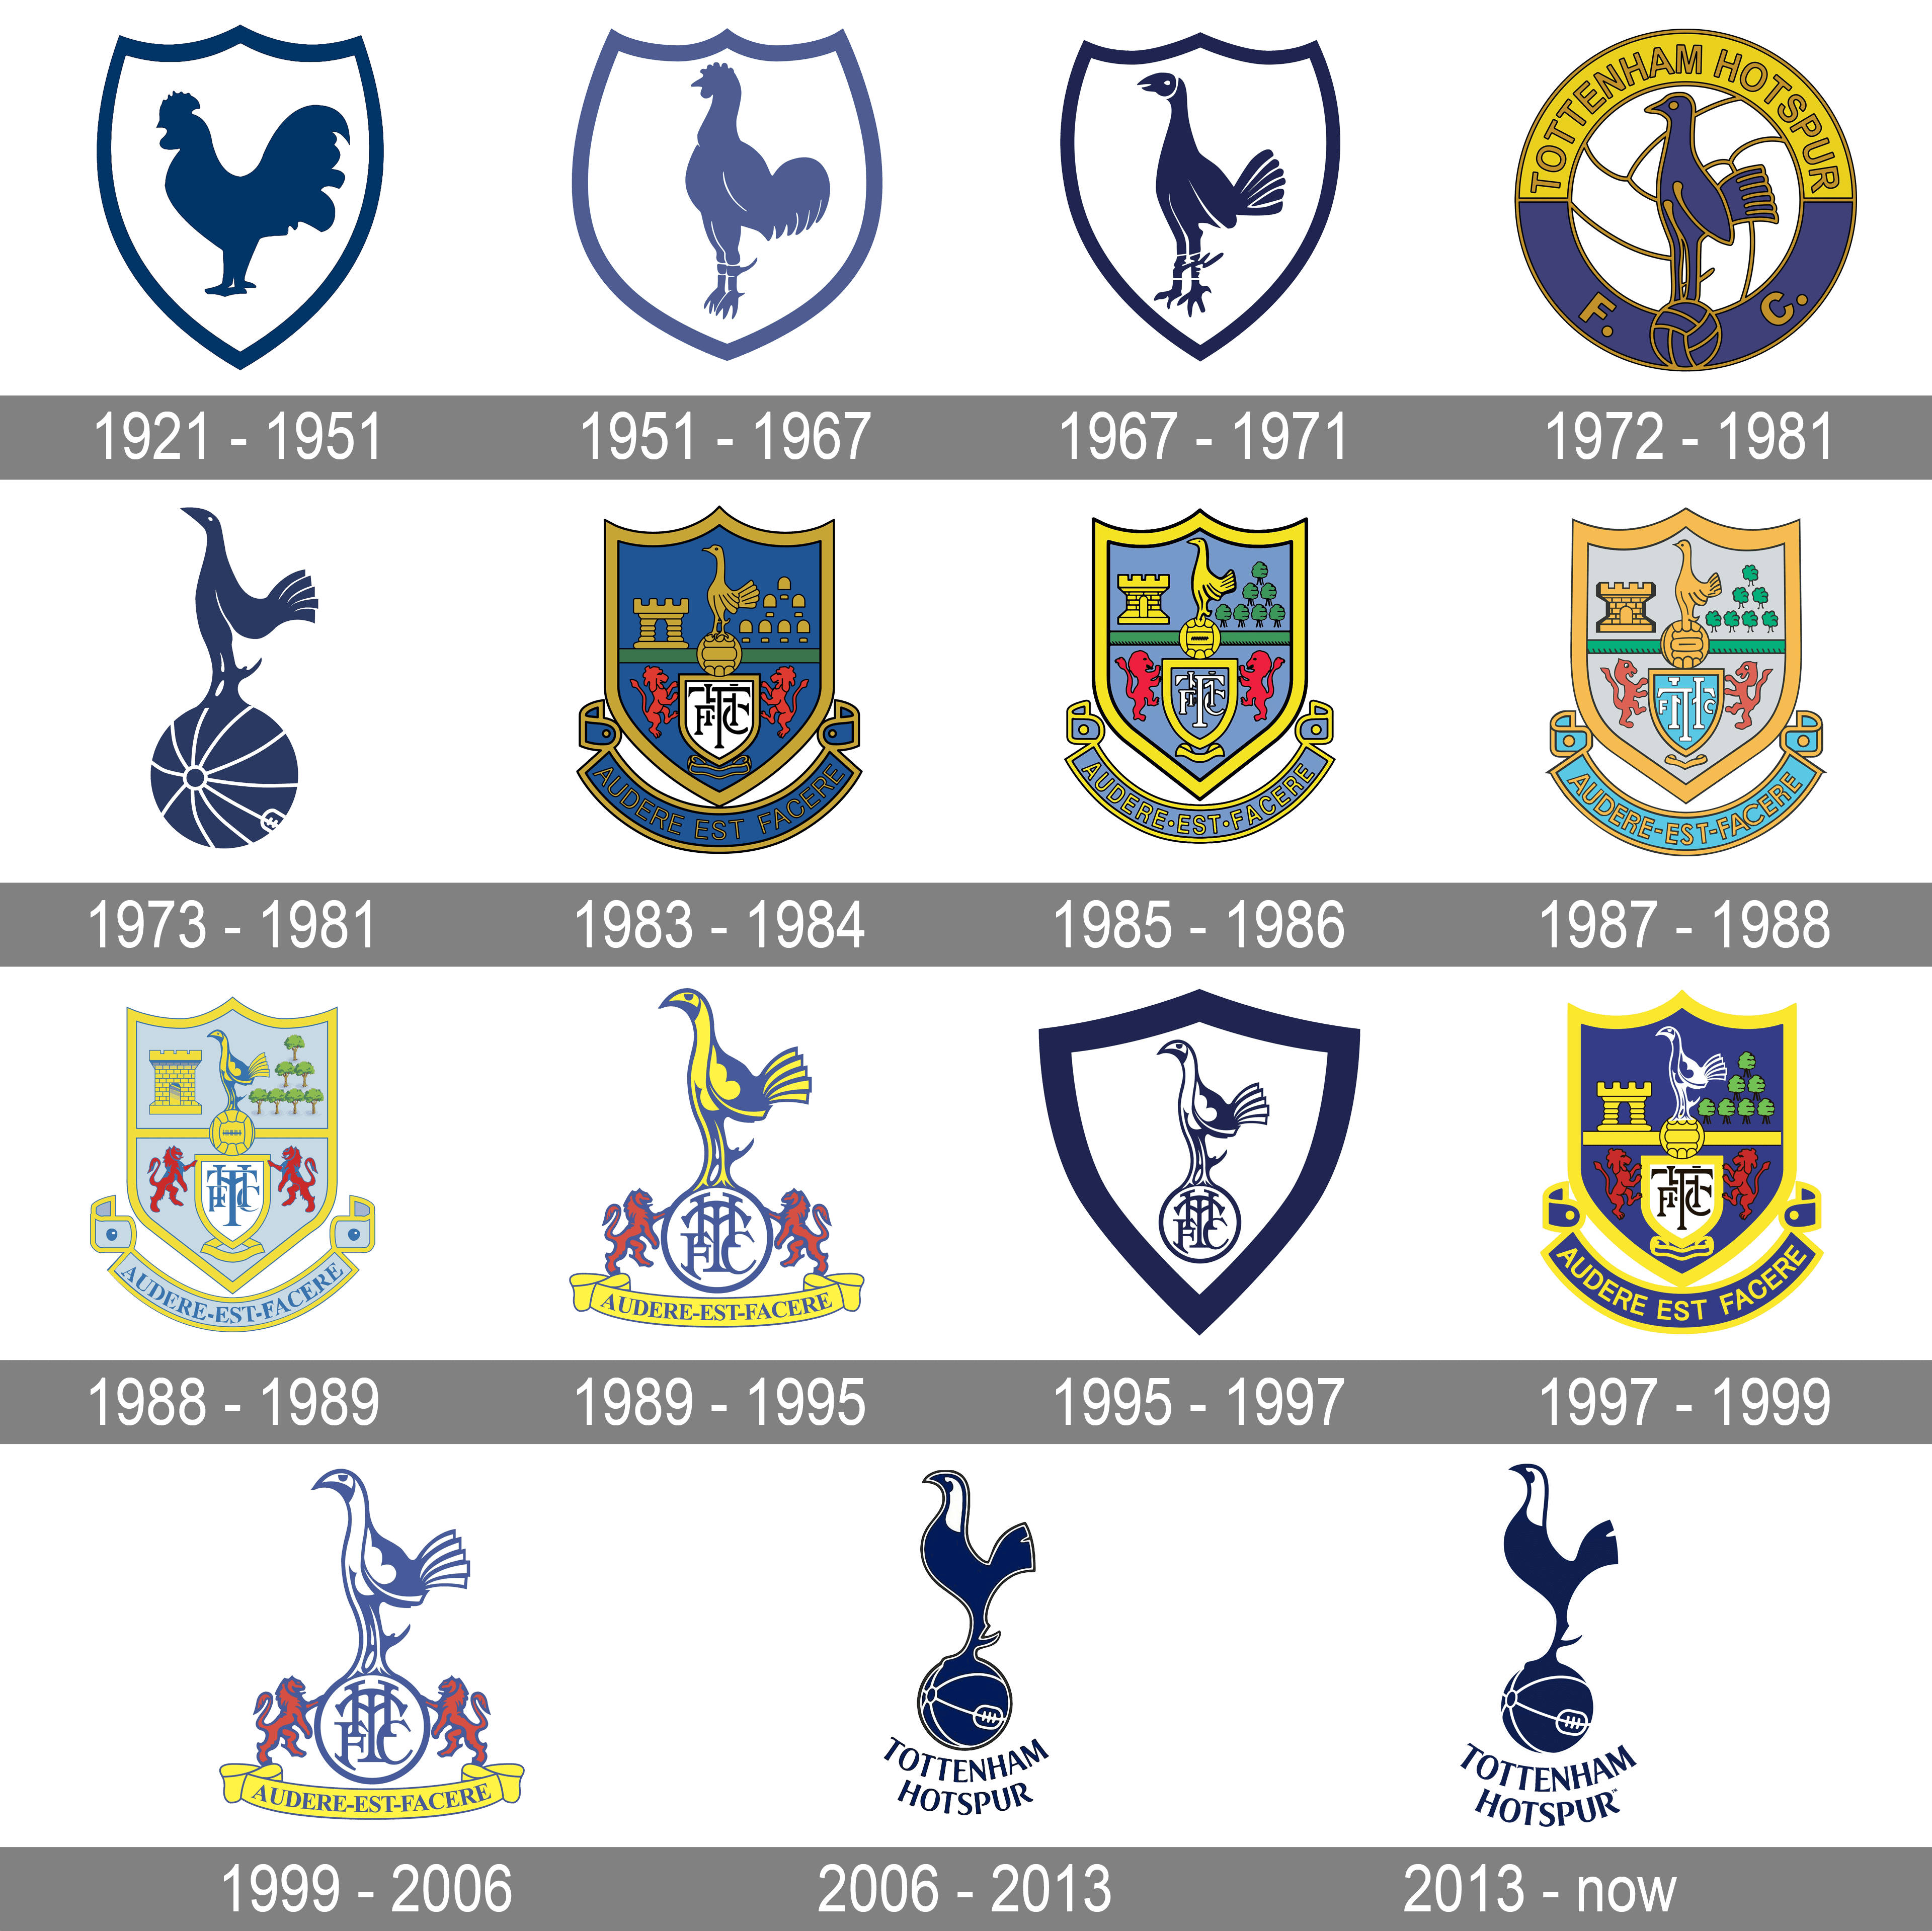 The Spurs Shirt: The Official History of the Tottenham Hotspur